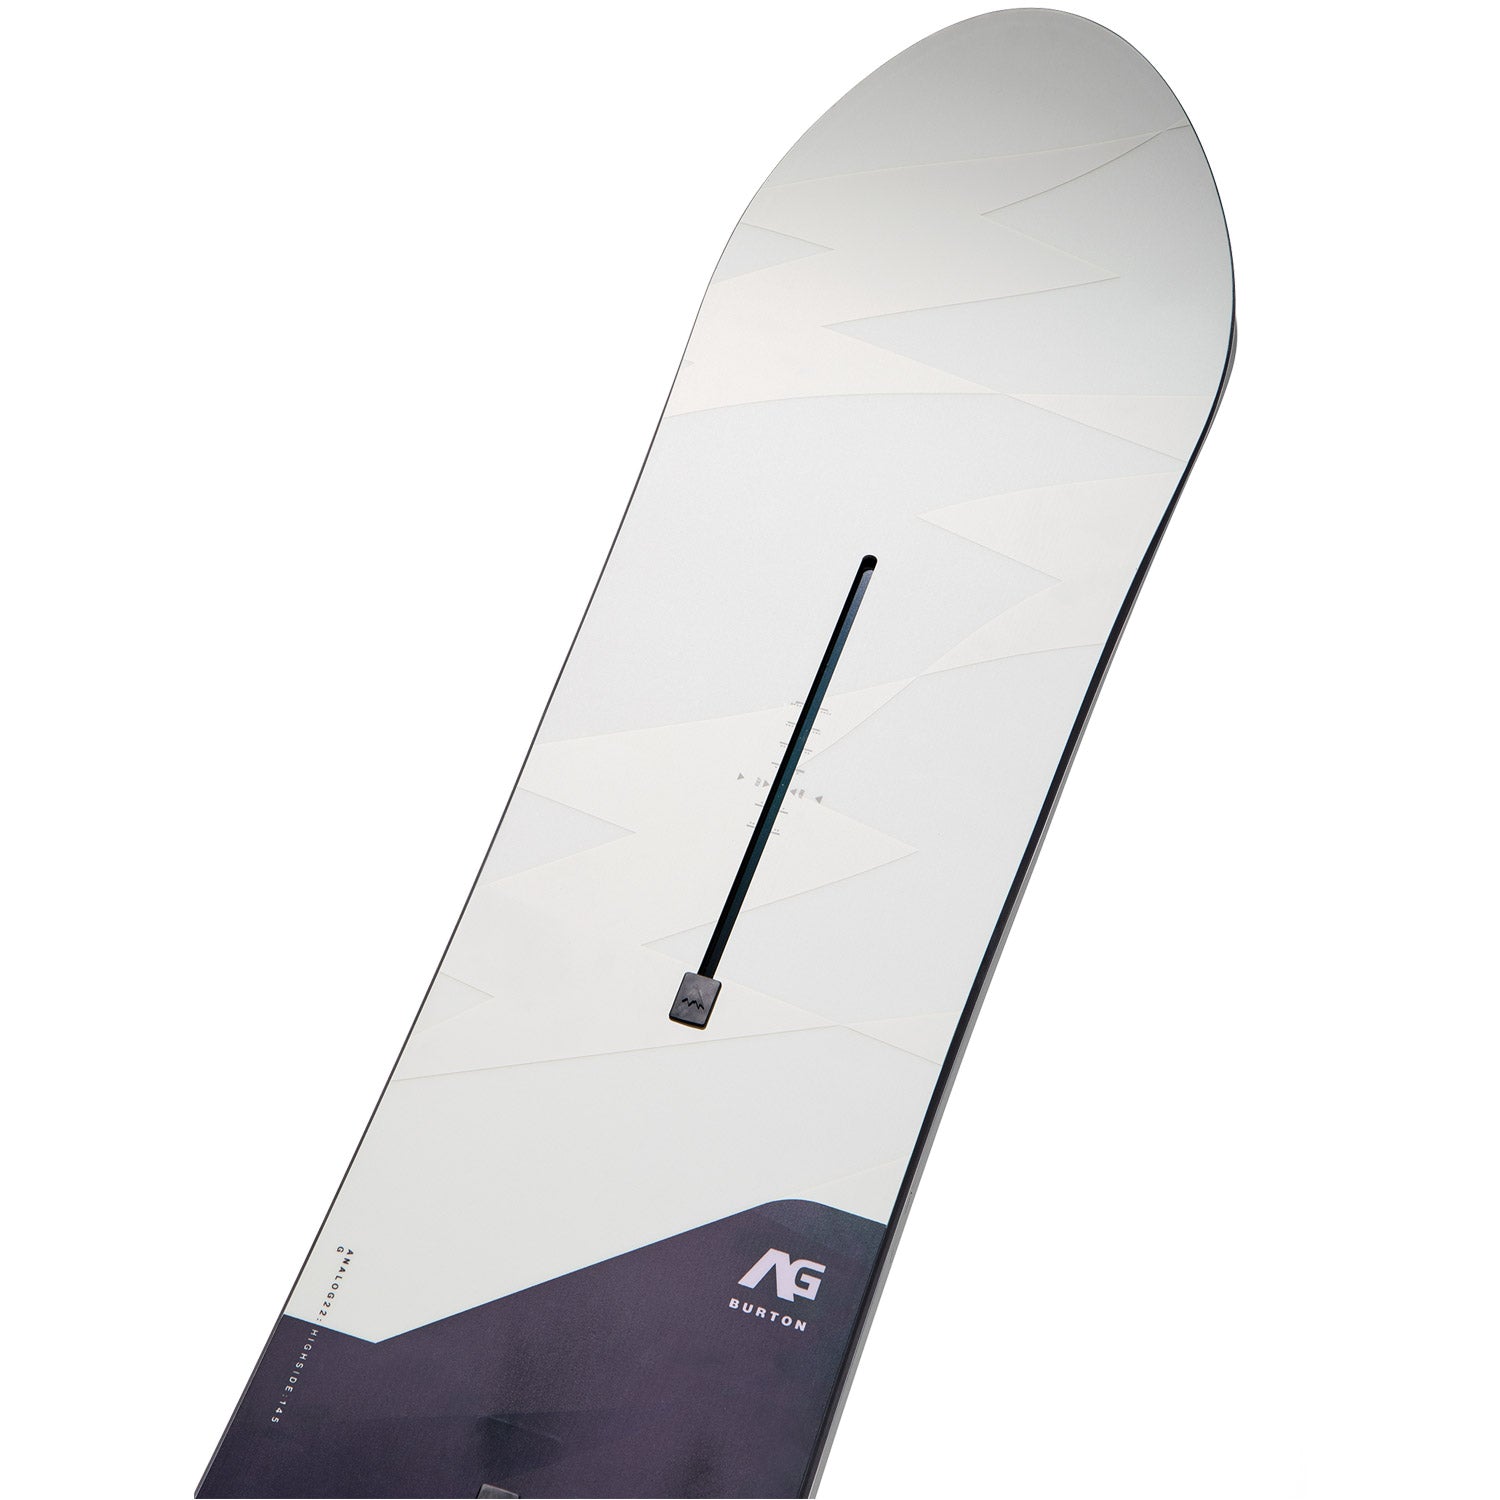 AG High Side Camber Snowboard 2023